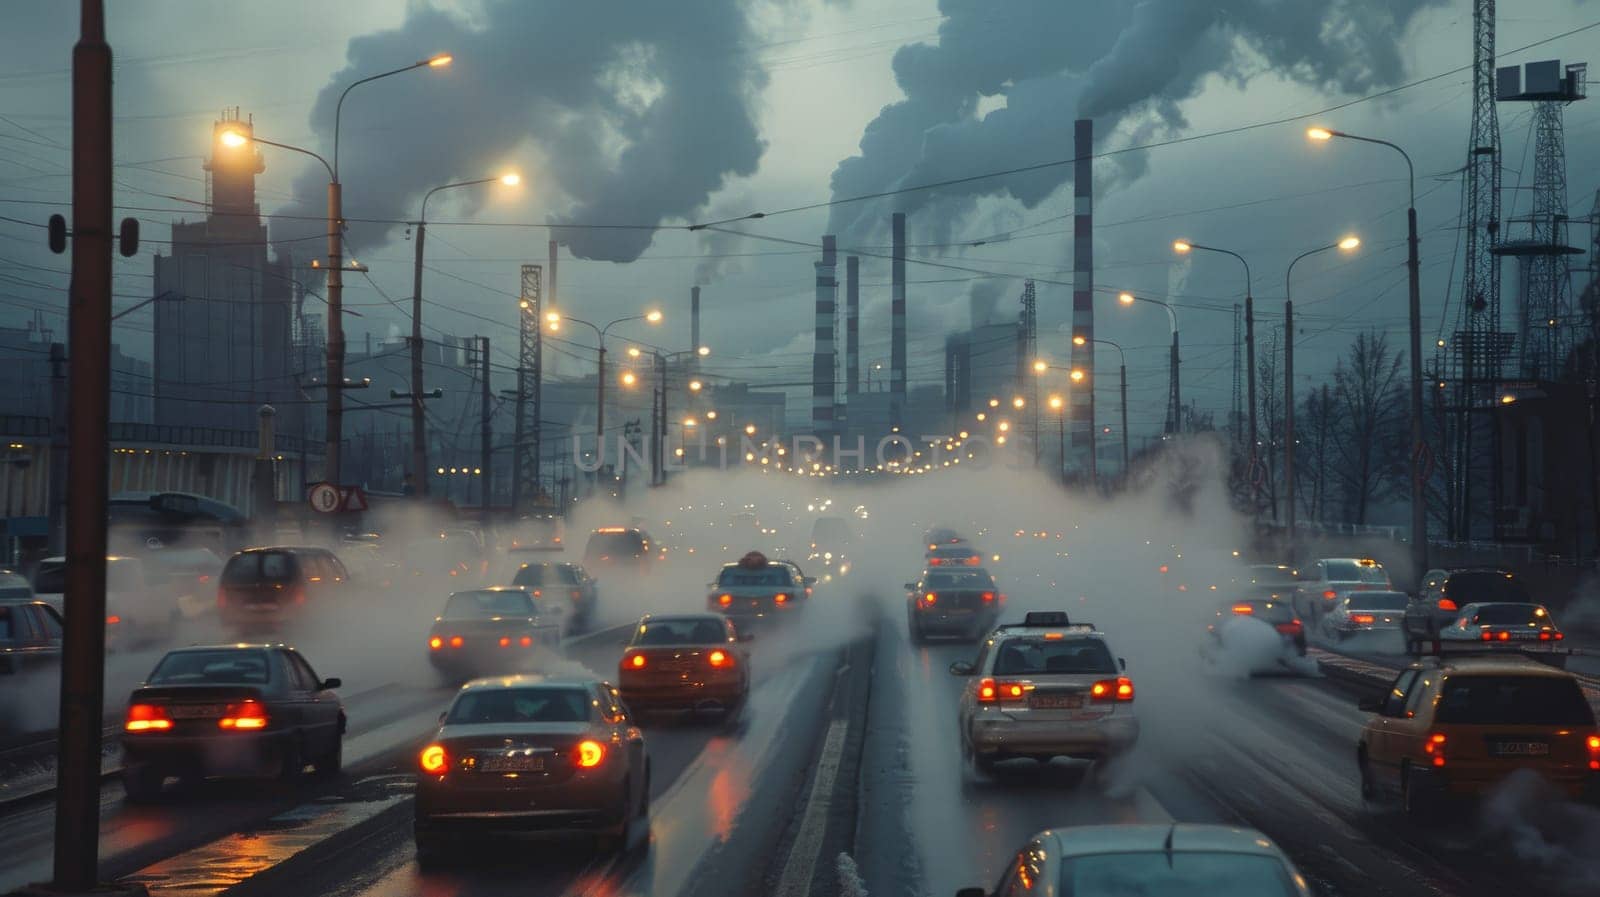 Urban Pollution Crisis, Heavy Traffic and Industrial Smoke in an Environmental Disaster Zone.